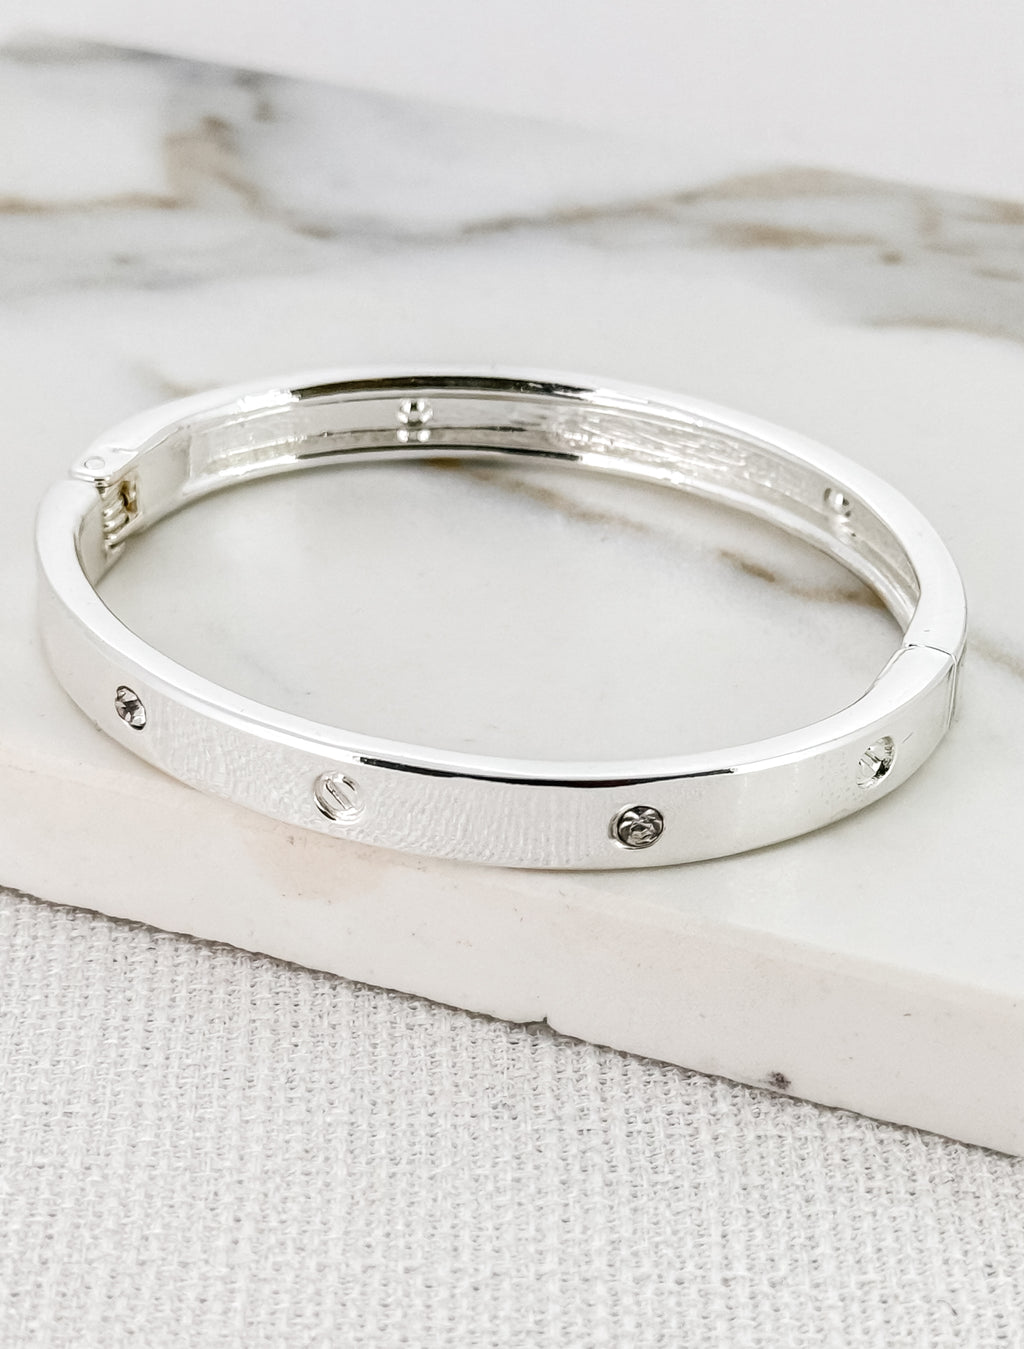 Envy Silver Hinged Bangle with Crystal Detail